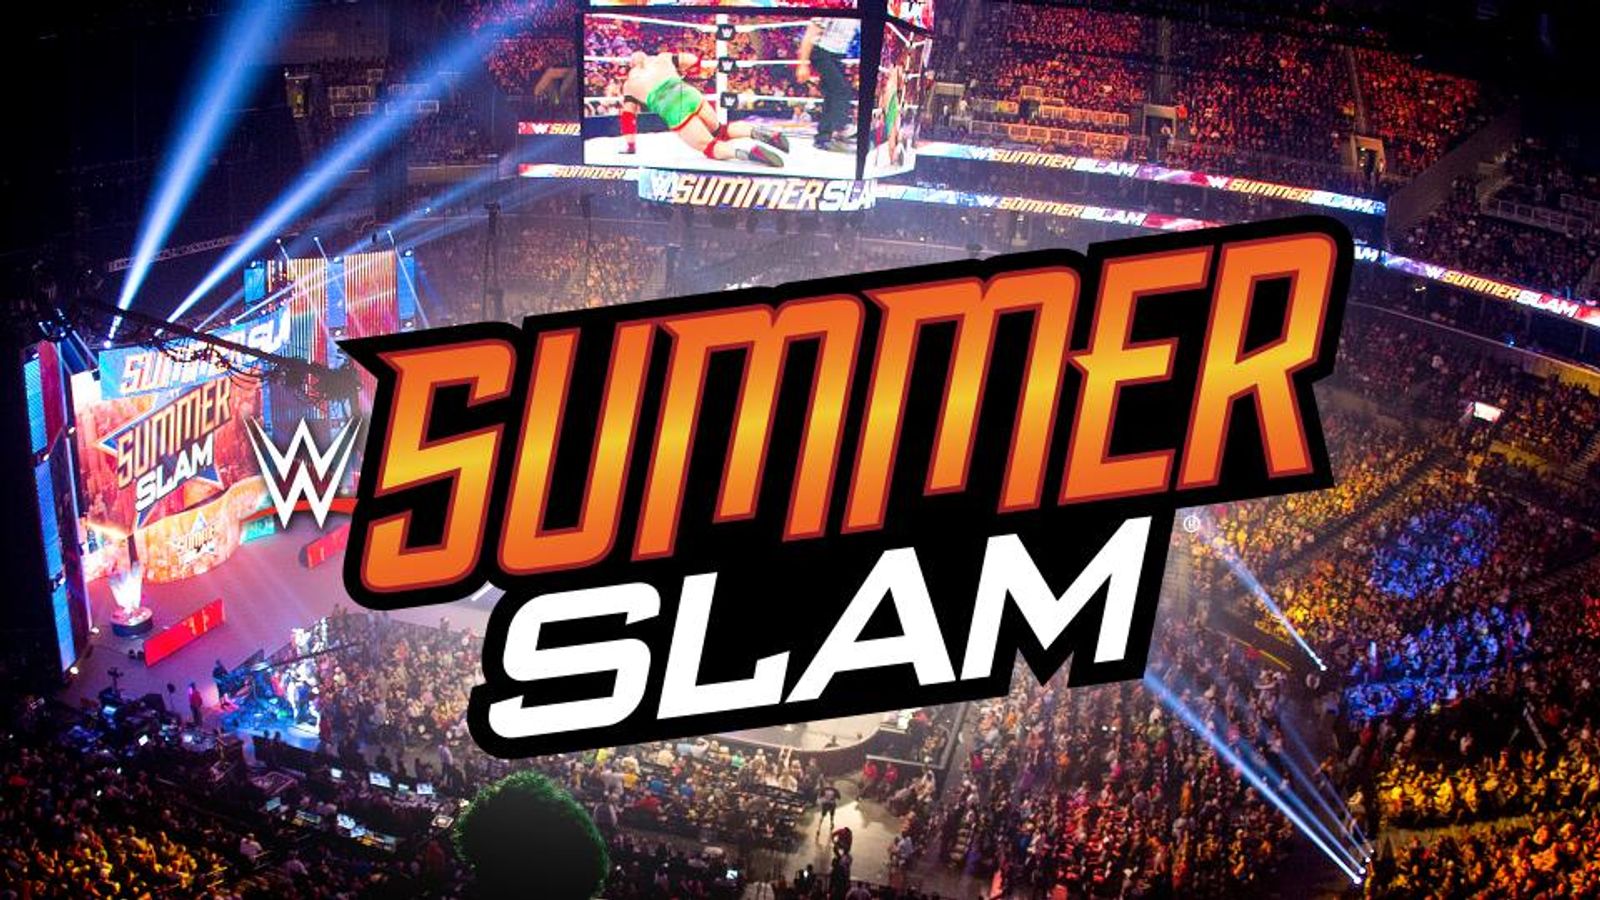 WWE SummerSlam quiz How much do you know about the big show? WWE